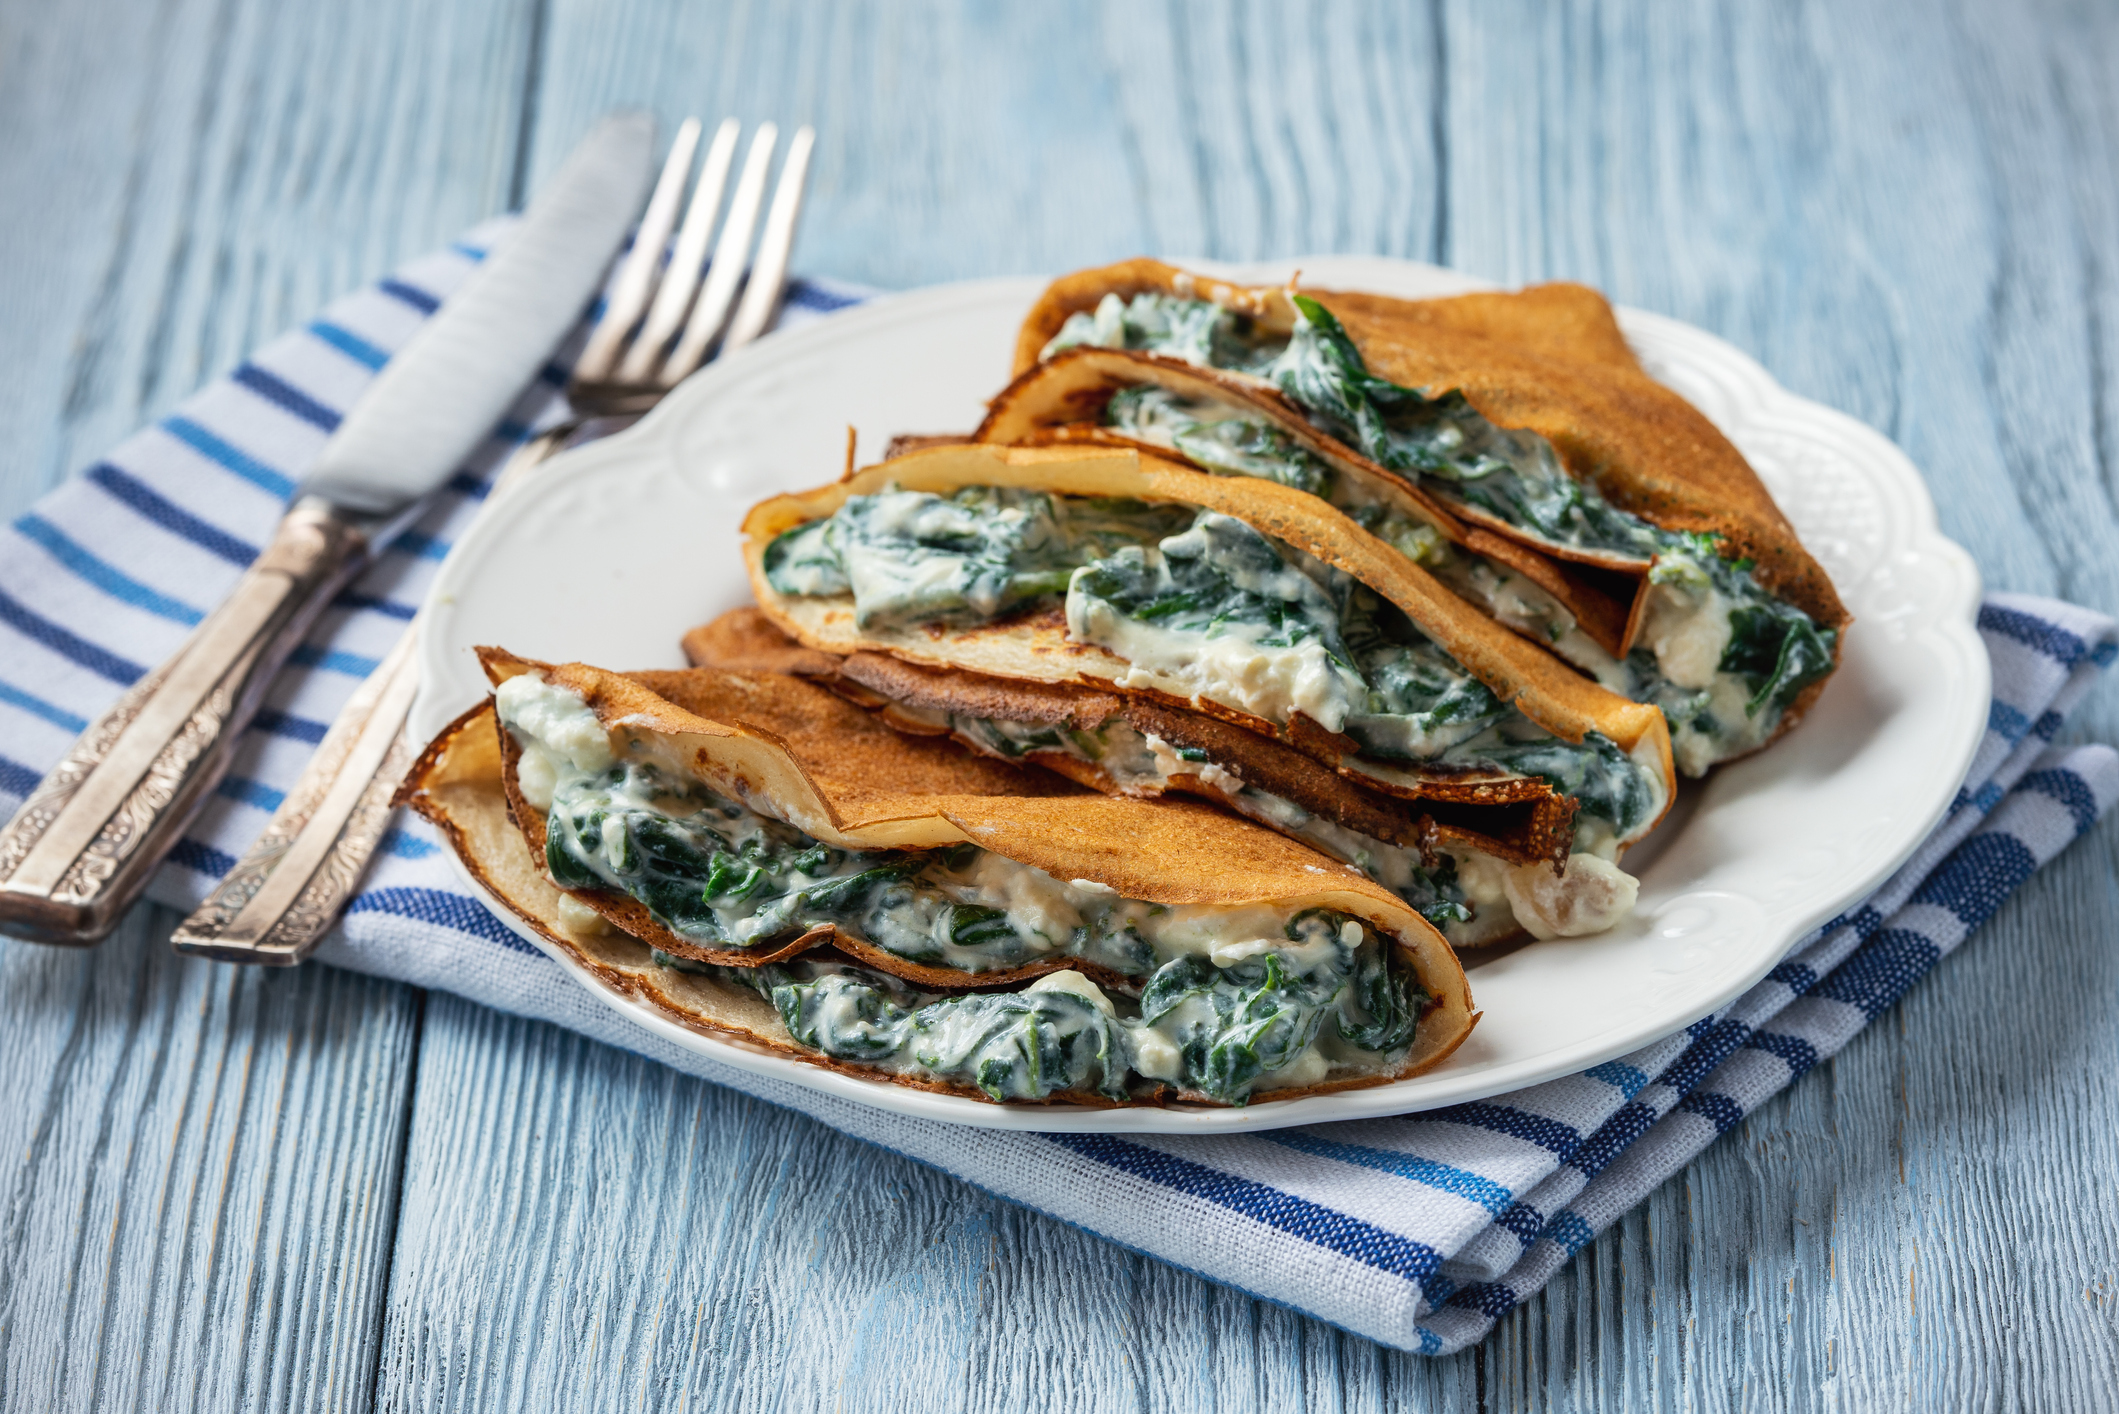 Spinach and feta cheese filled crepes.